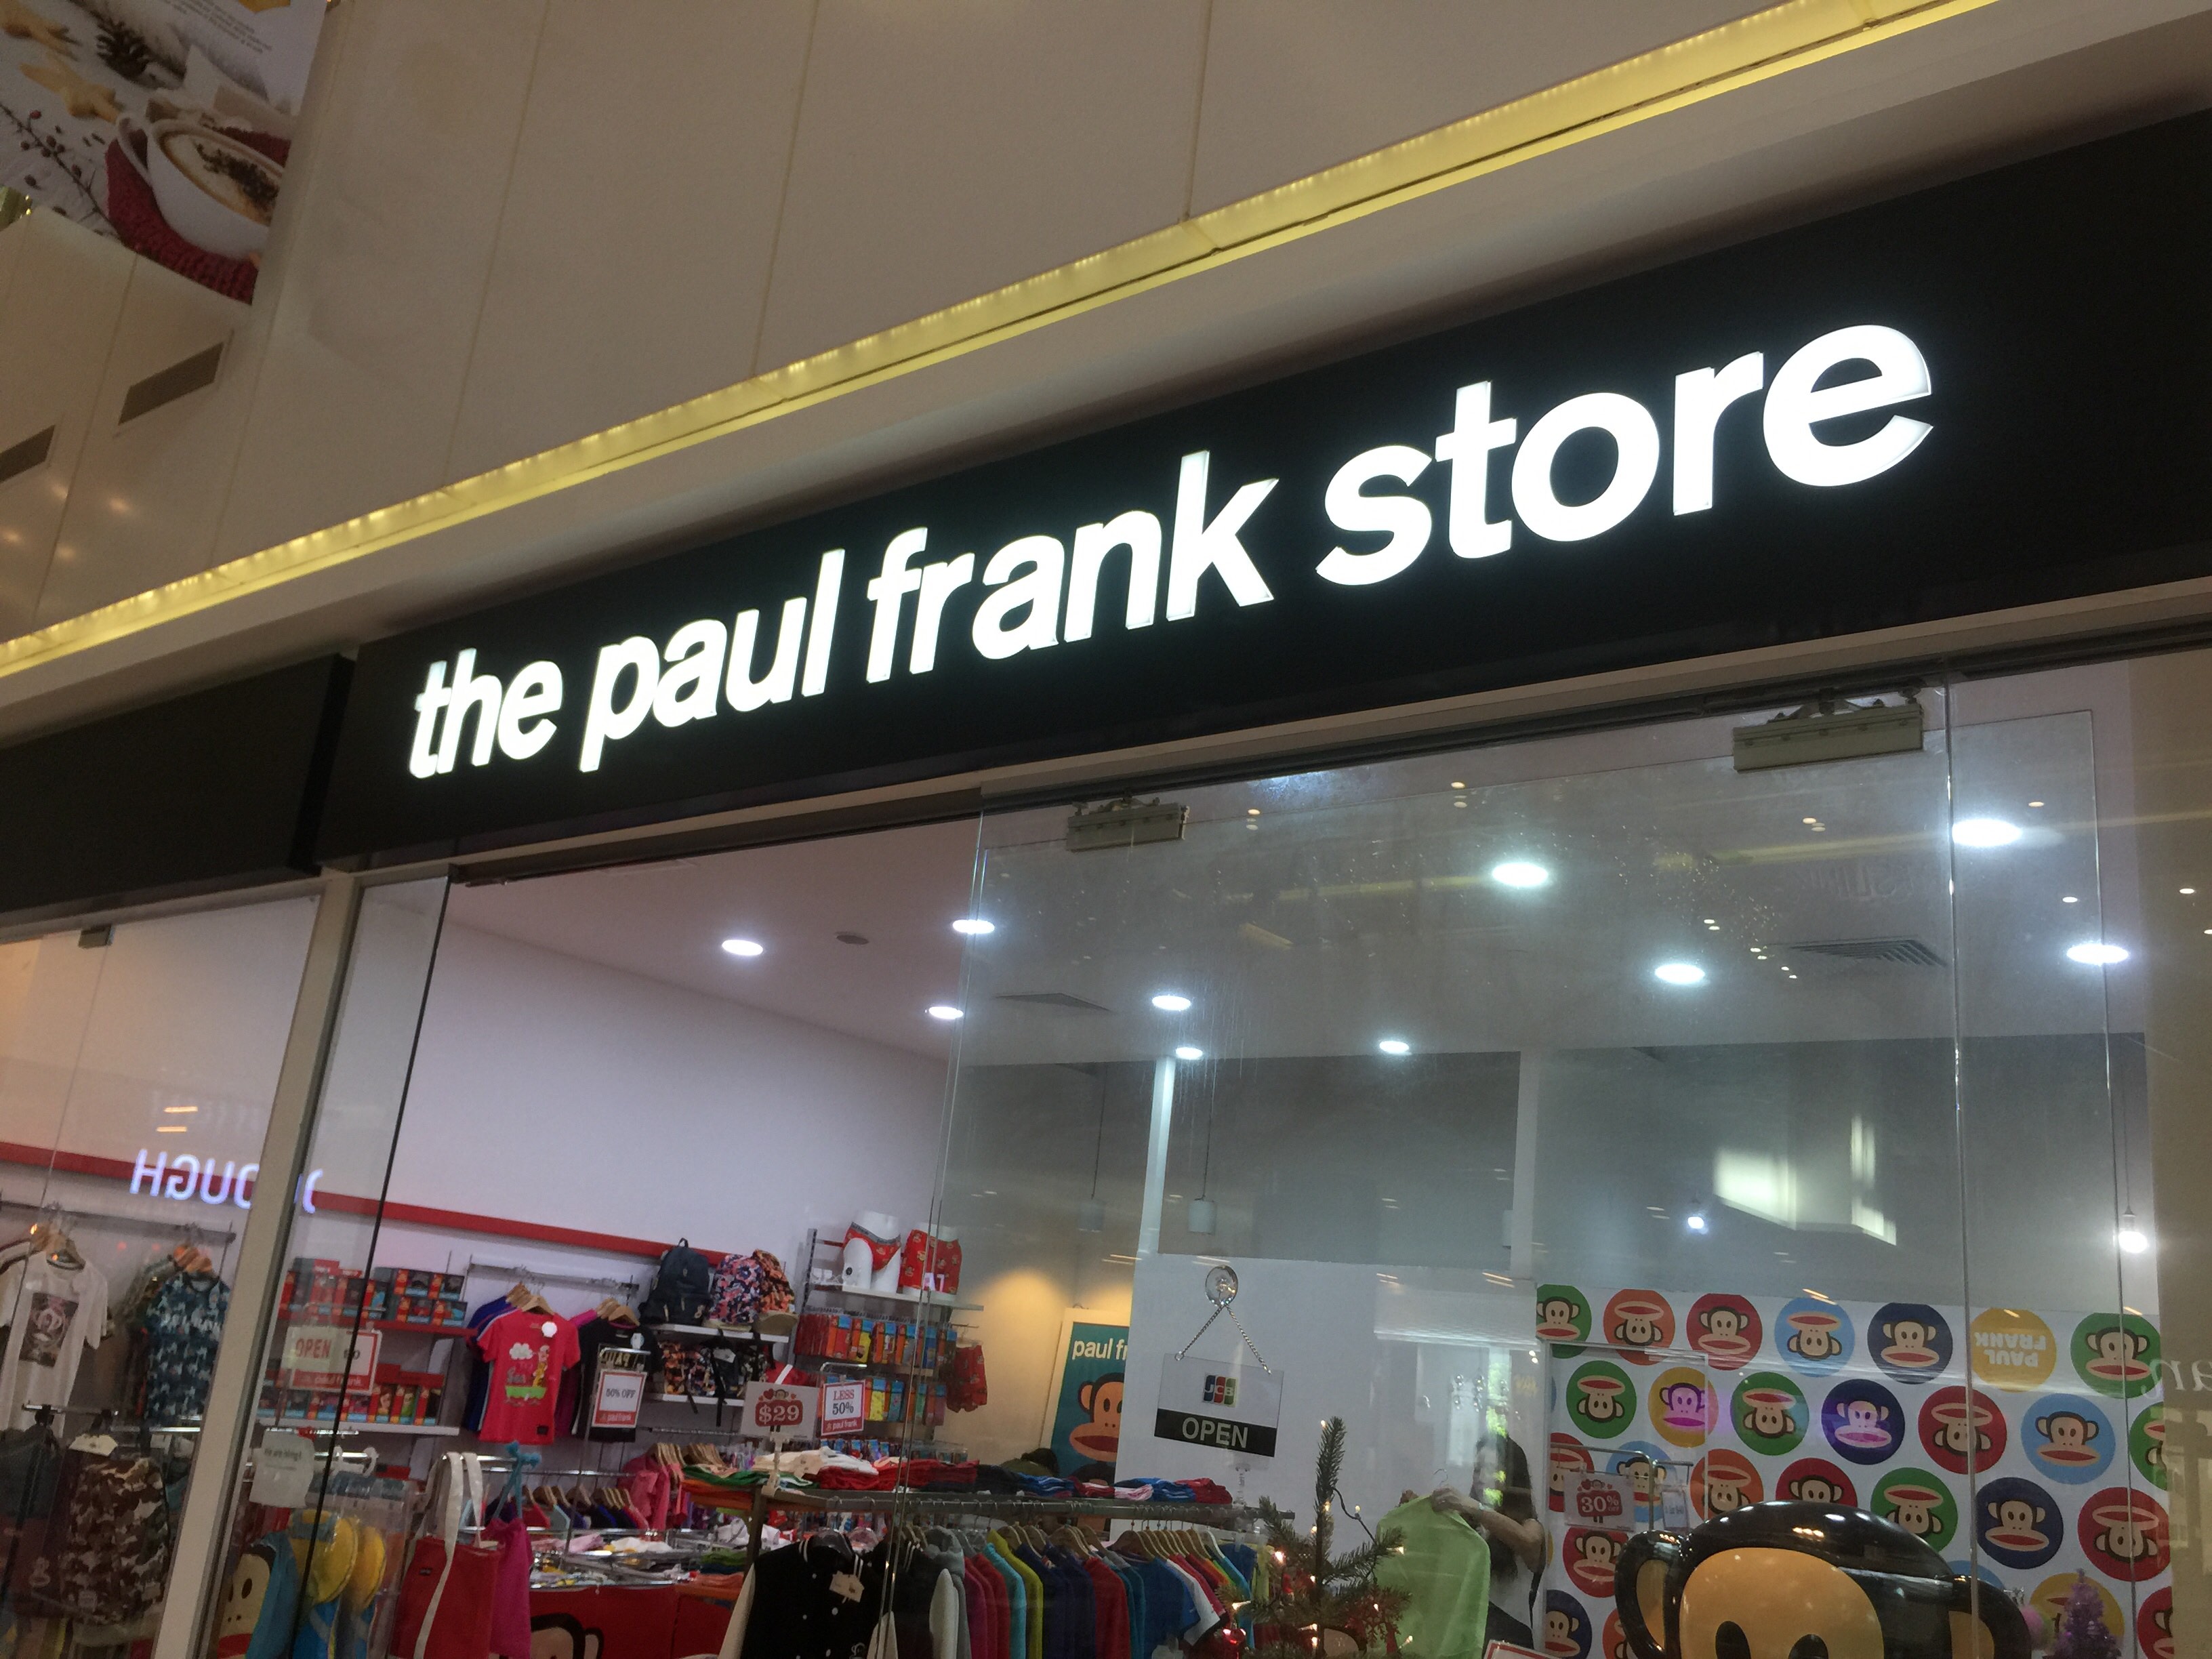 The Paul Frank Store 